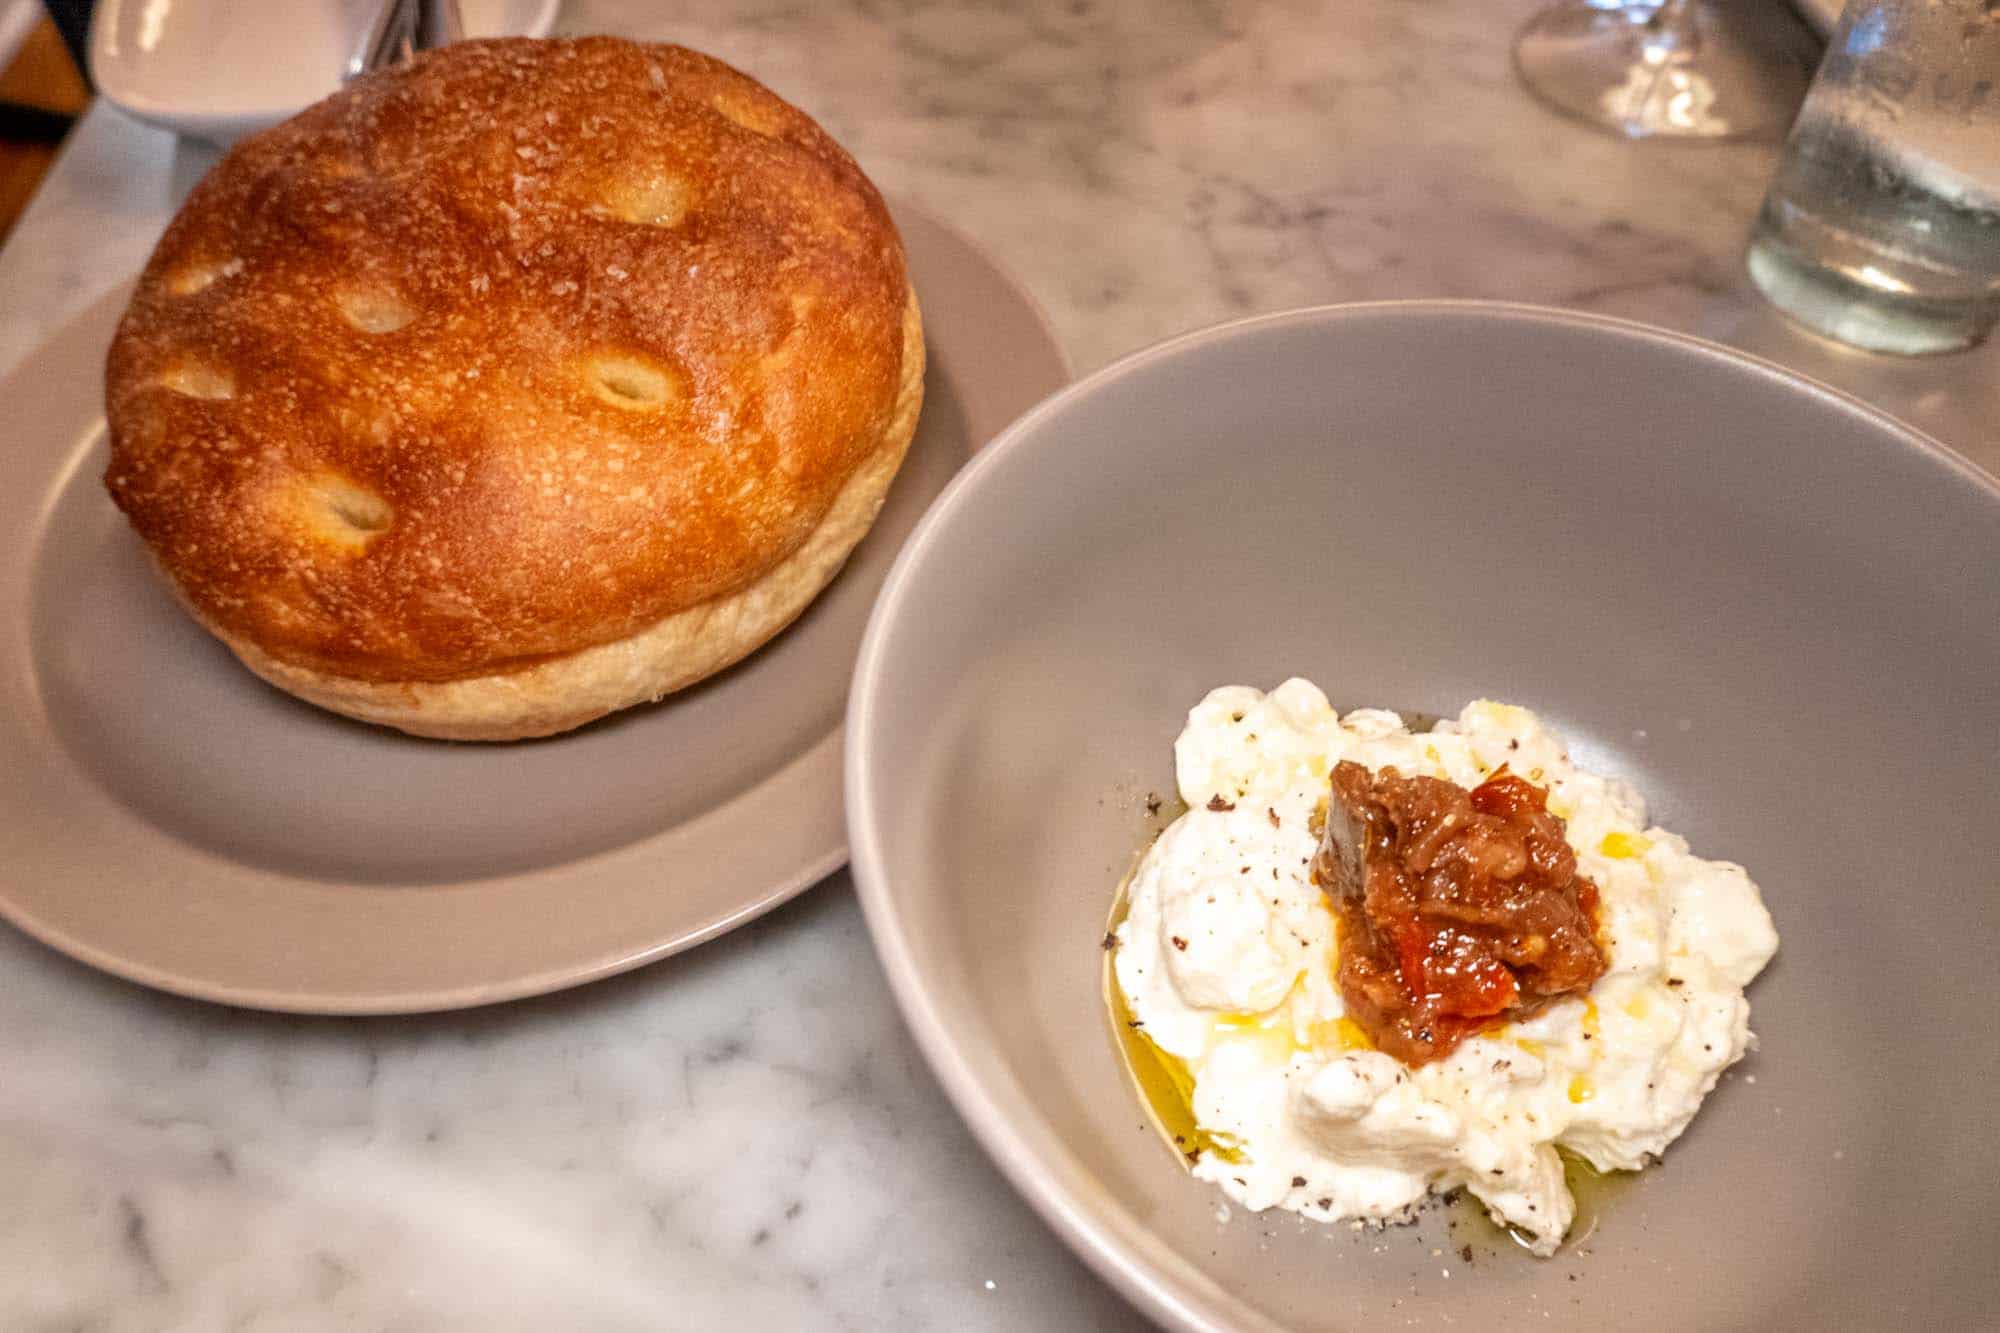 Bowl of stracciatella cheese along with a plate containing a large loaf of focaccia bread